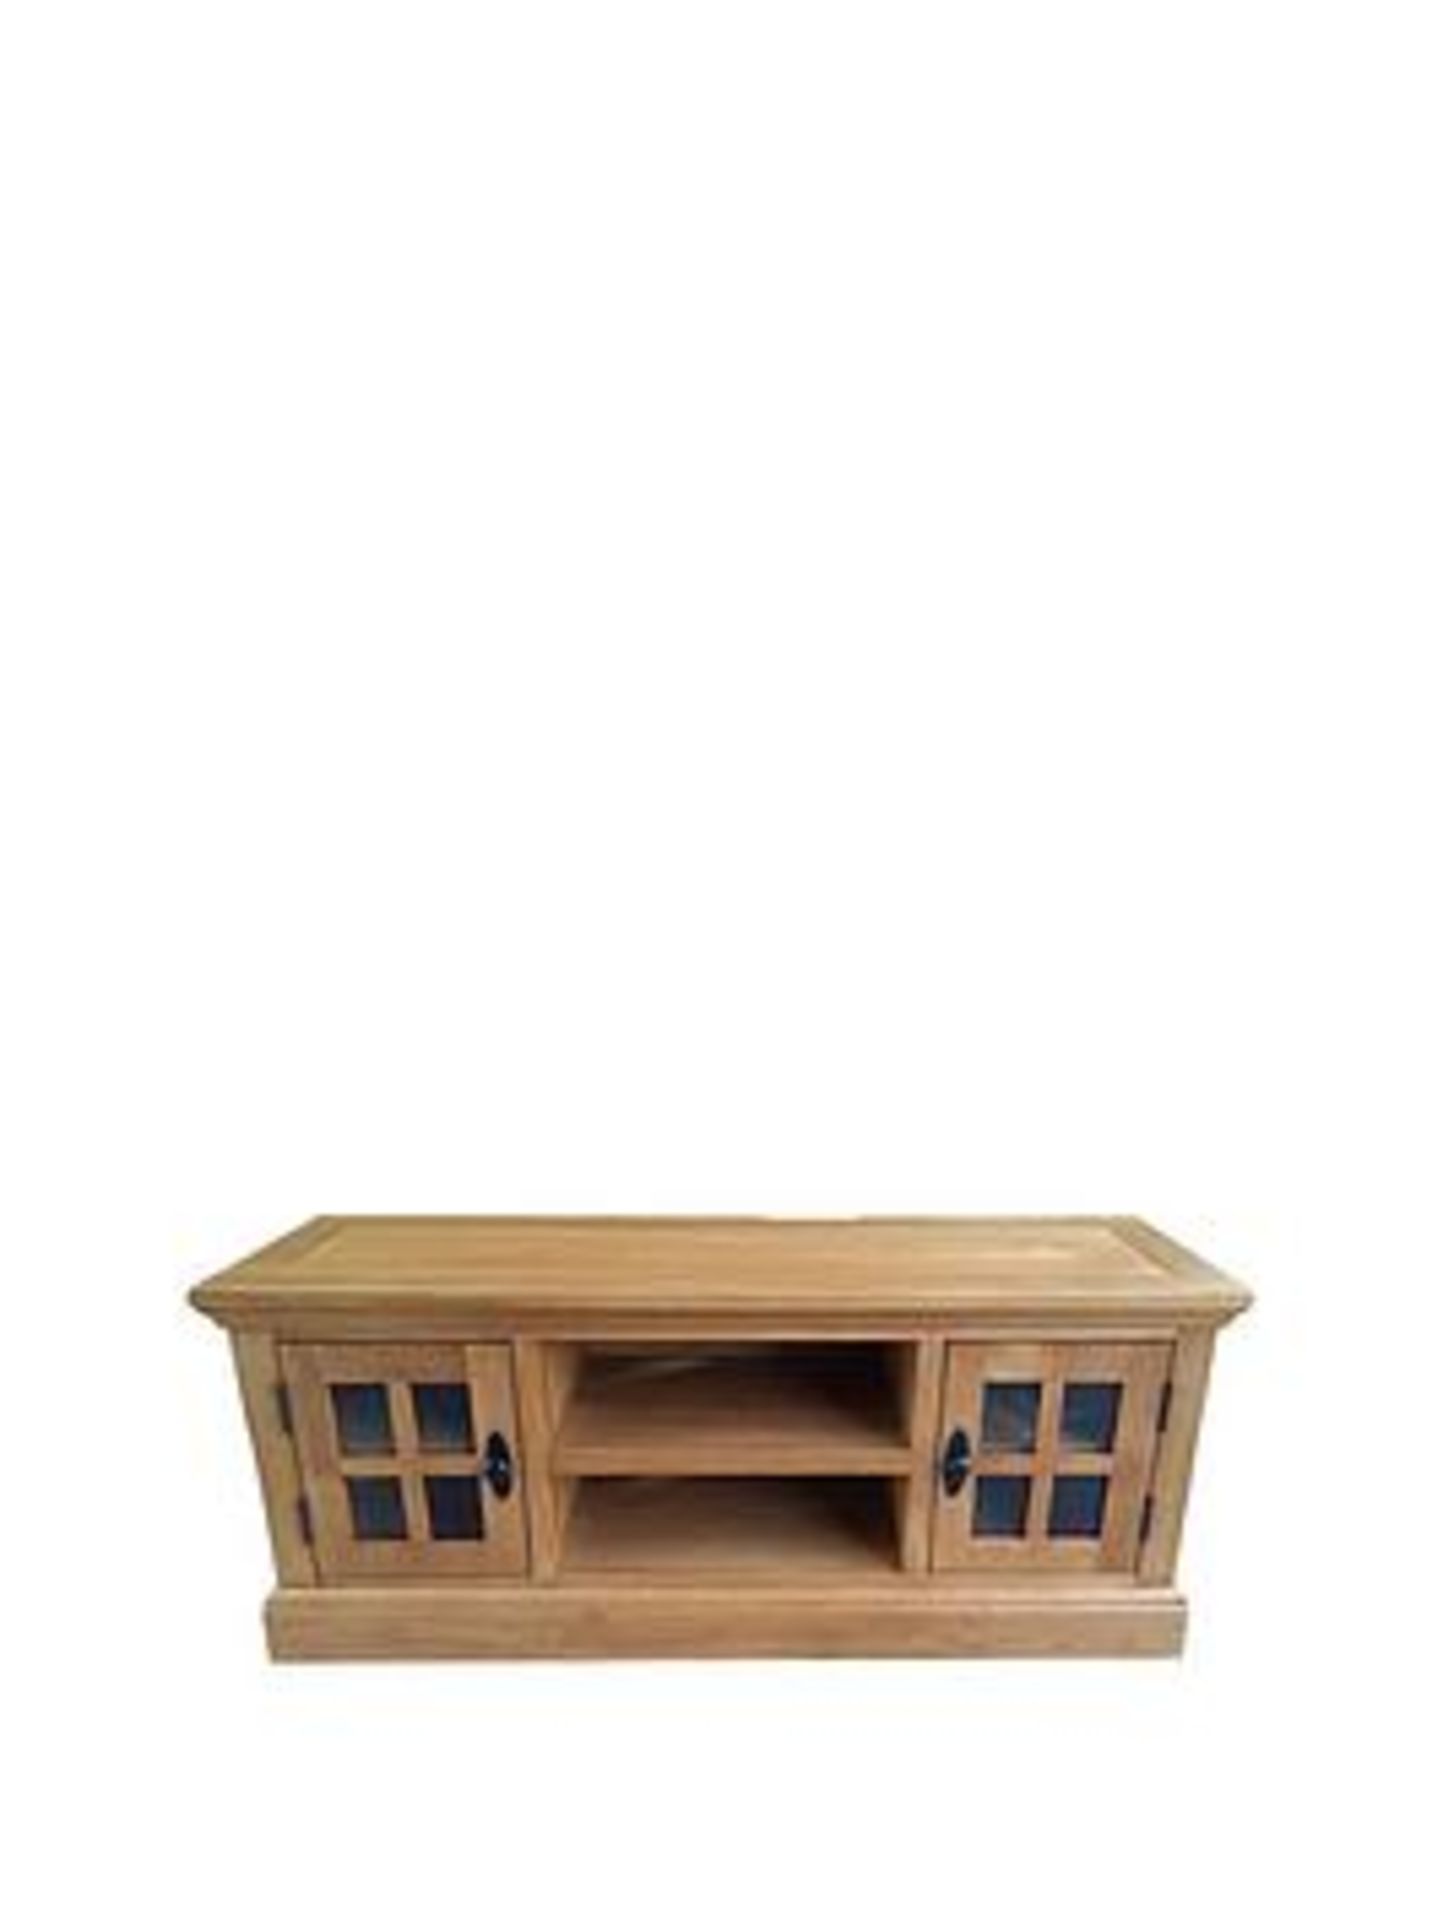 Boxed Item Ideal Home Whitford Tv Unit [Oak] 50X120X40Cm Rrp:£442.0 - Image 2 of 2